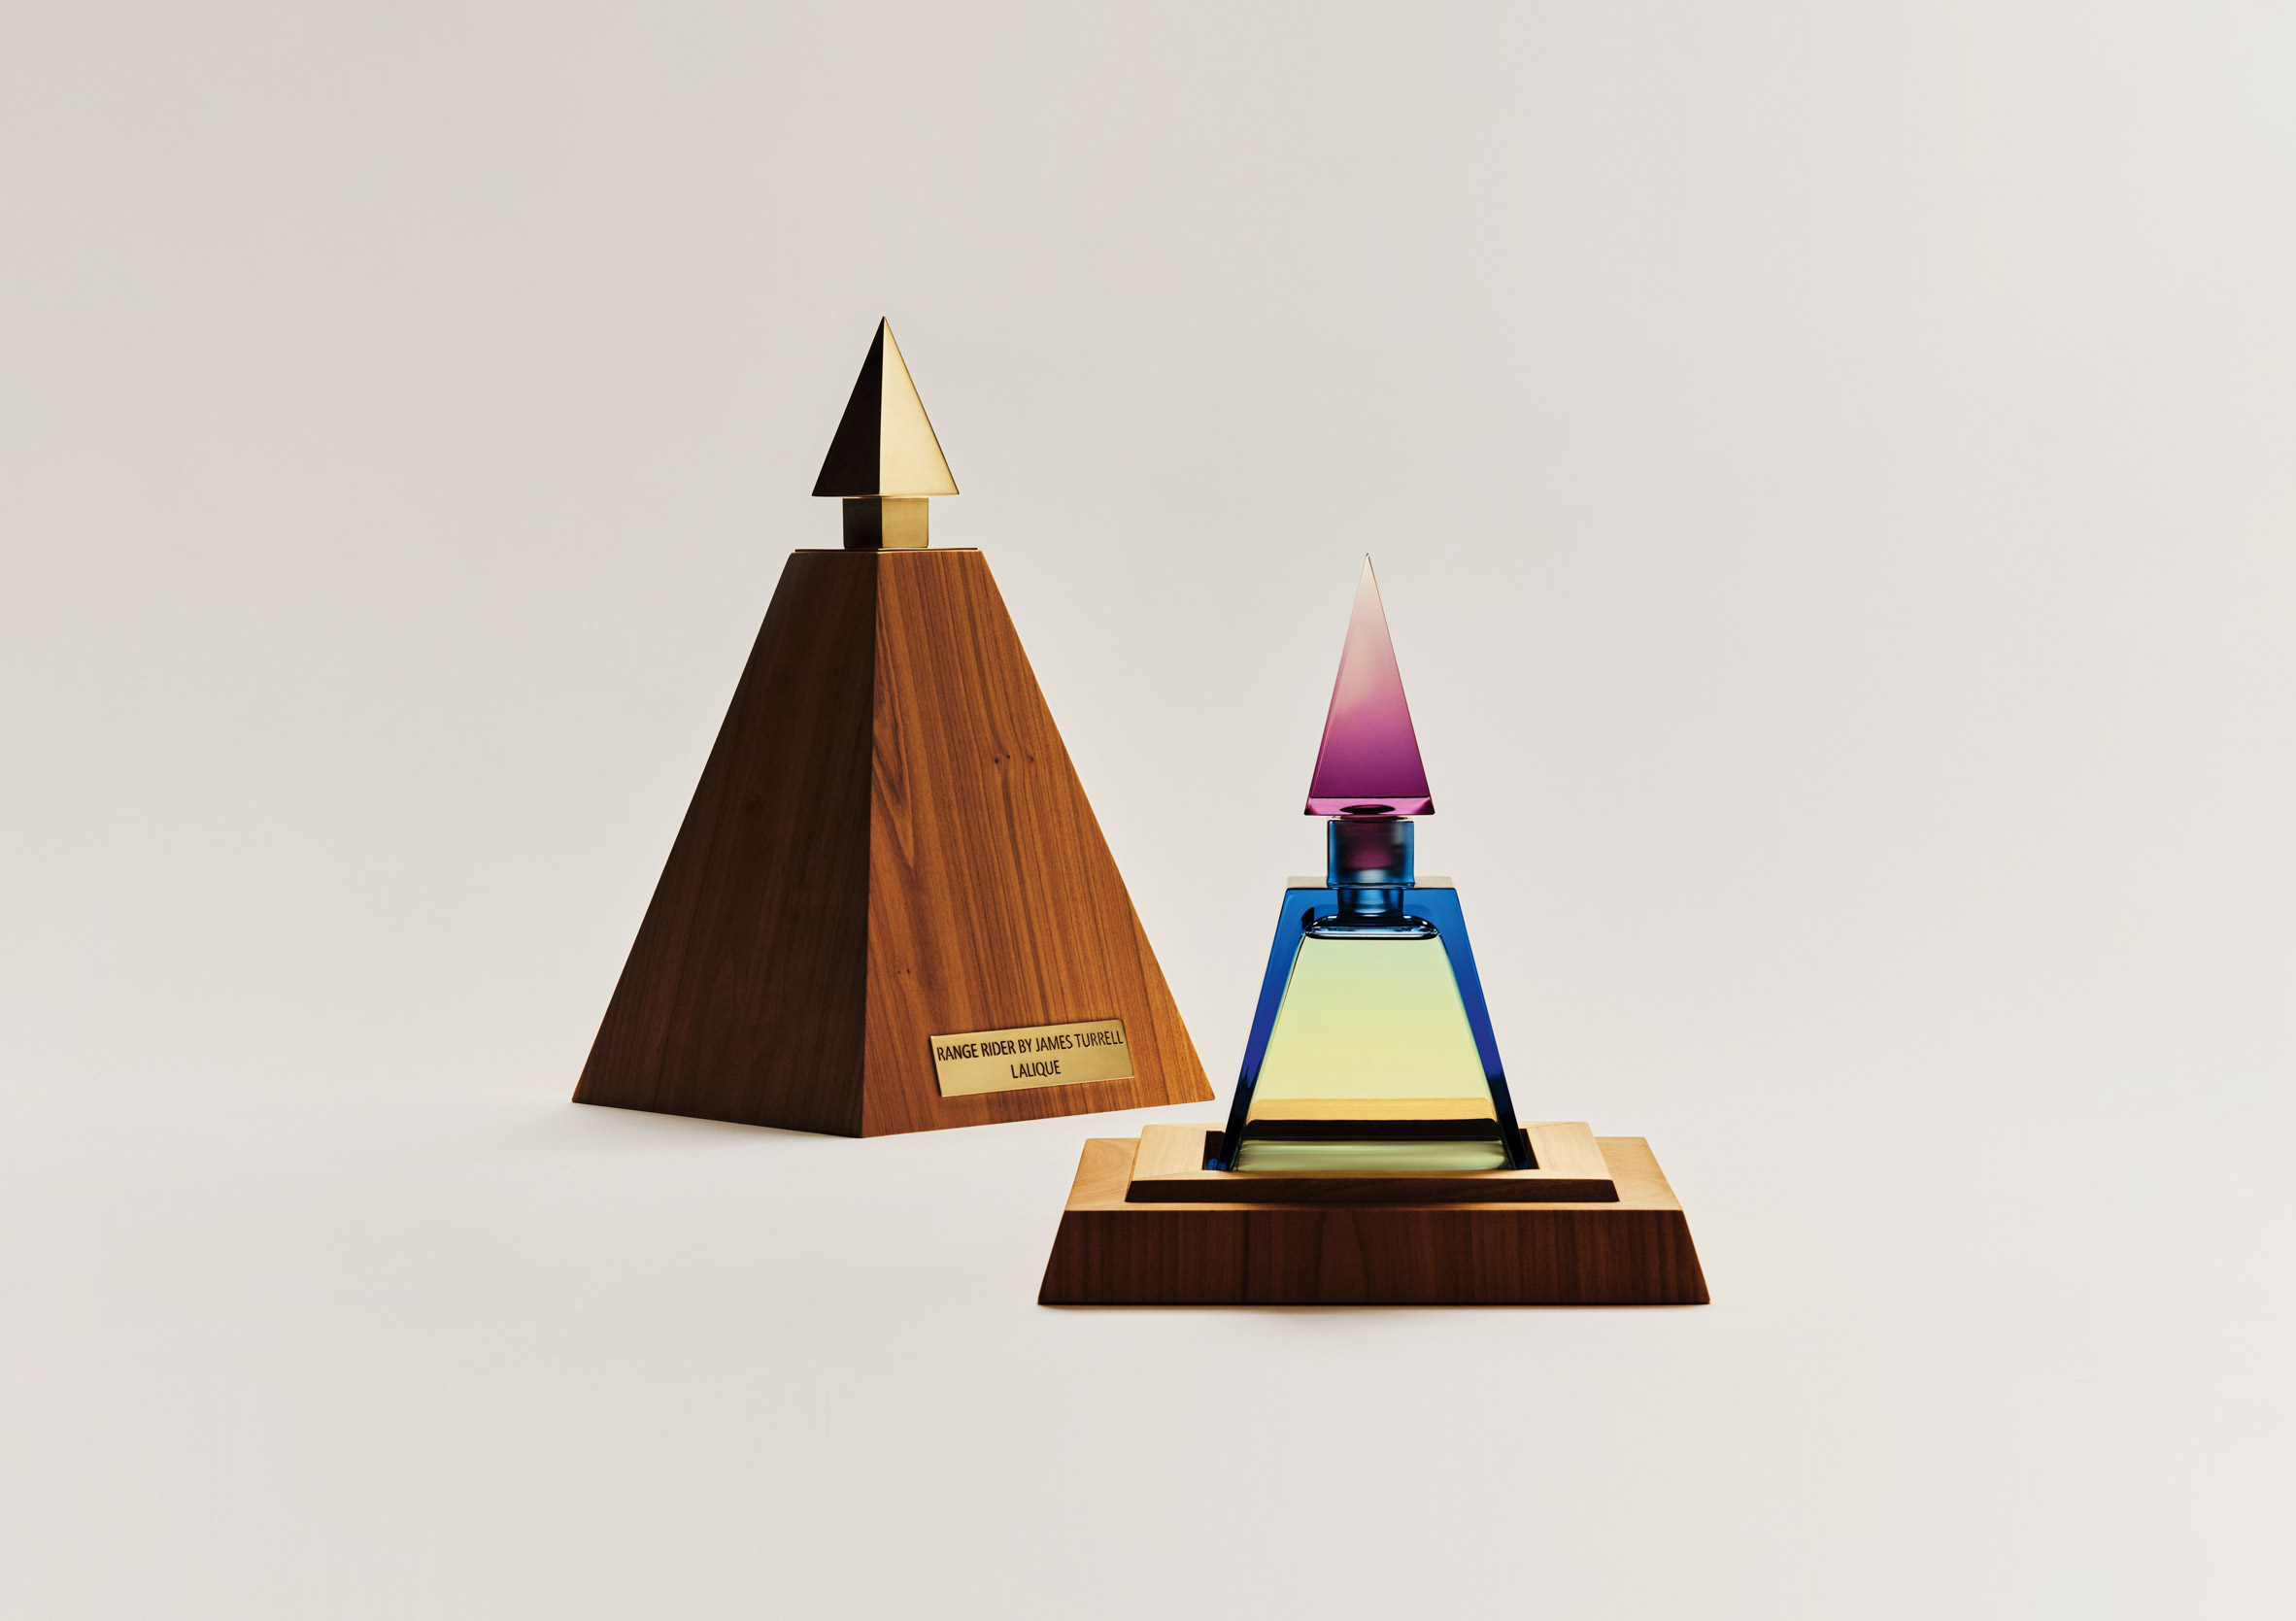 A pyramid shaped perfume bottle and a wooden case